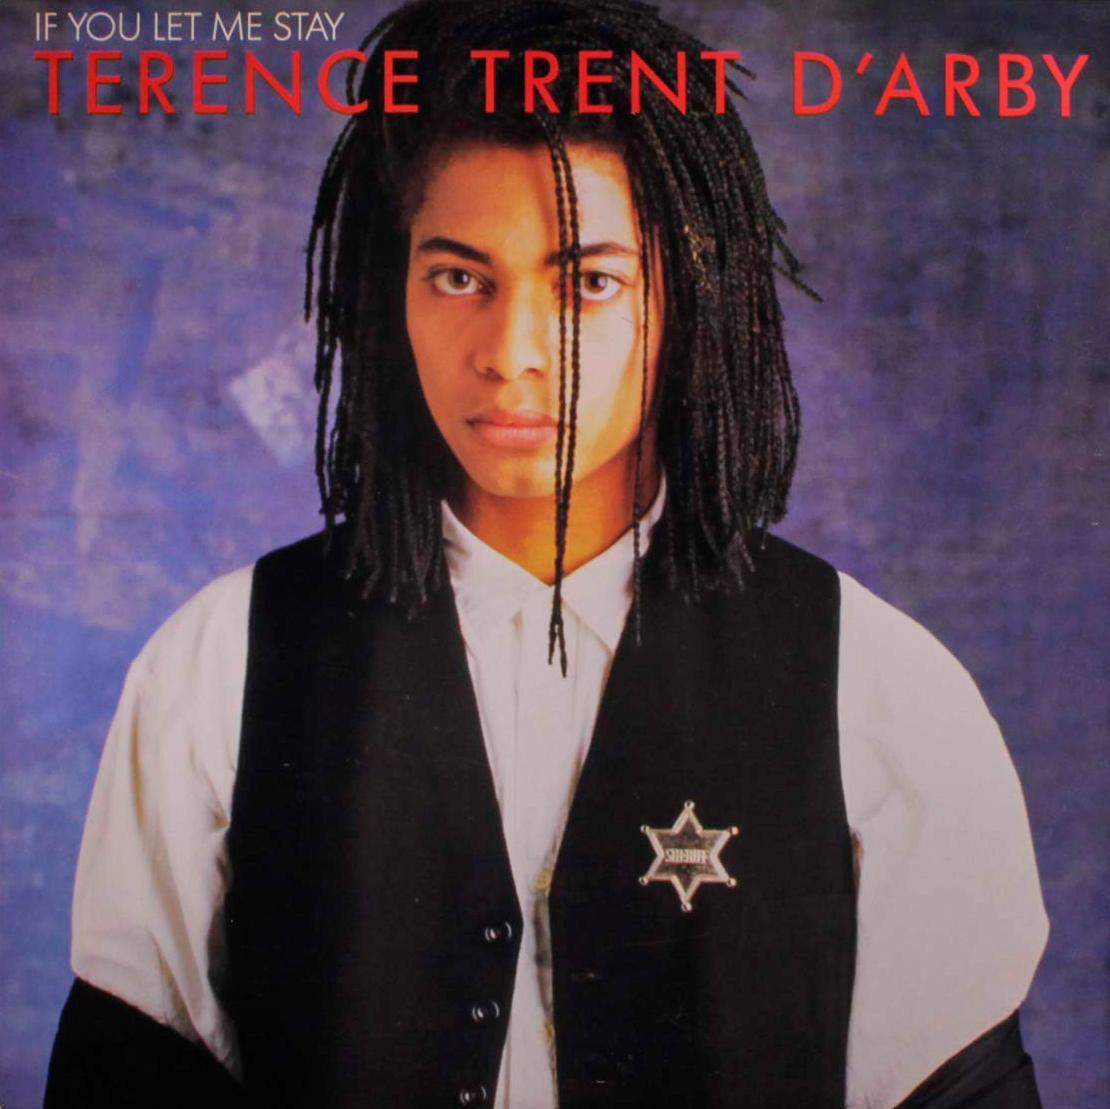 Image Gallery For Terence Trent D Arby If You Let Me Stay Music Video Filmaffinity